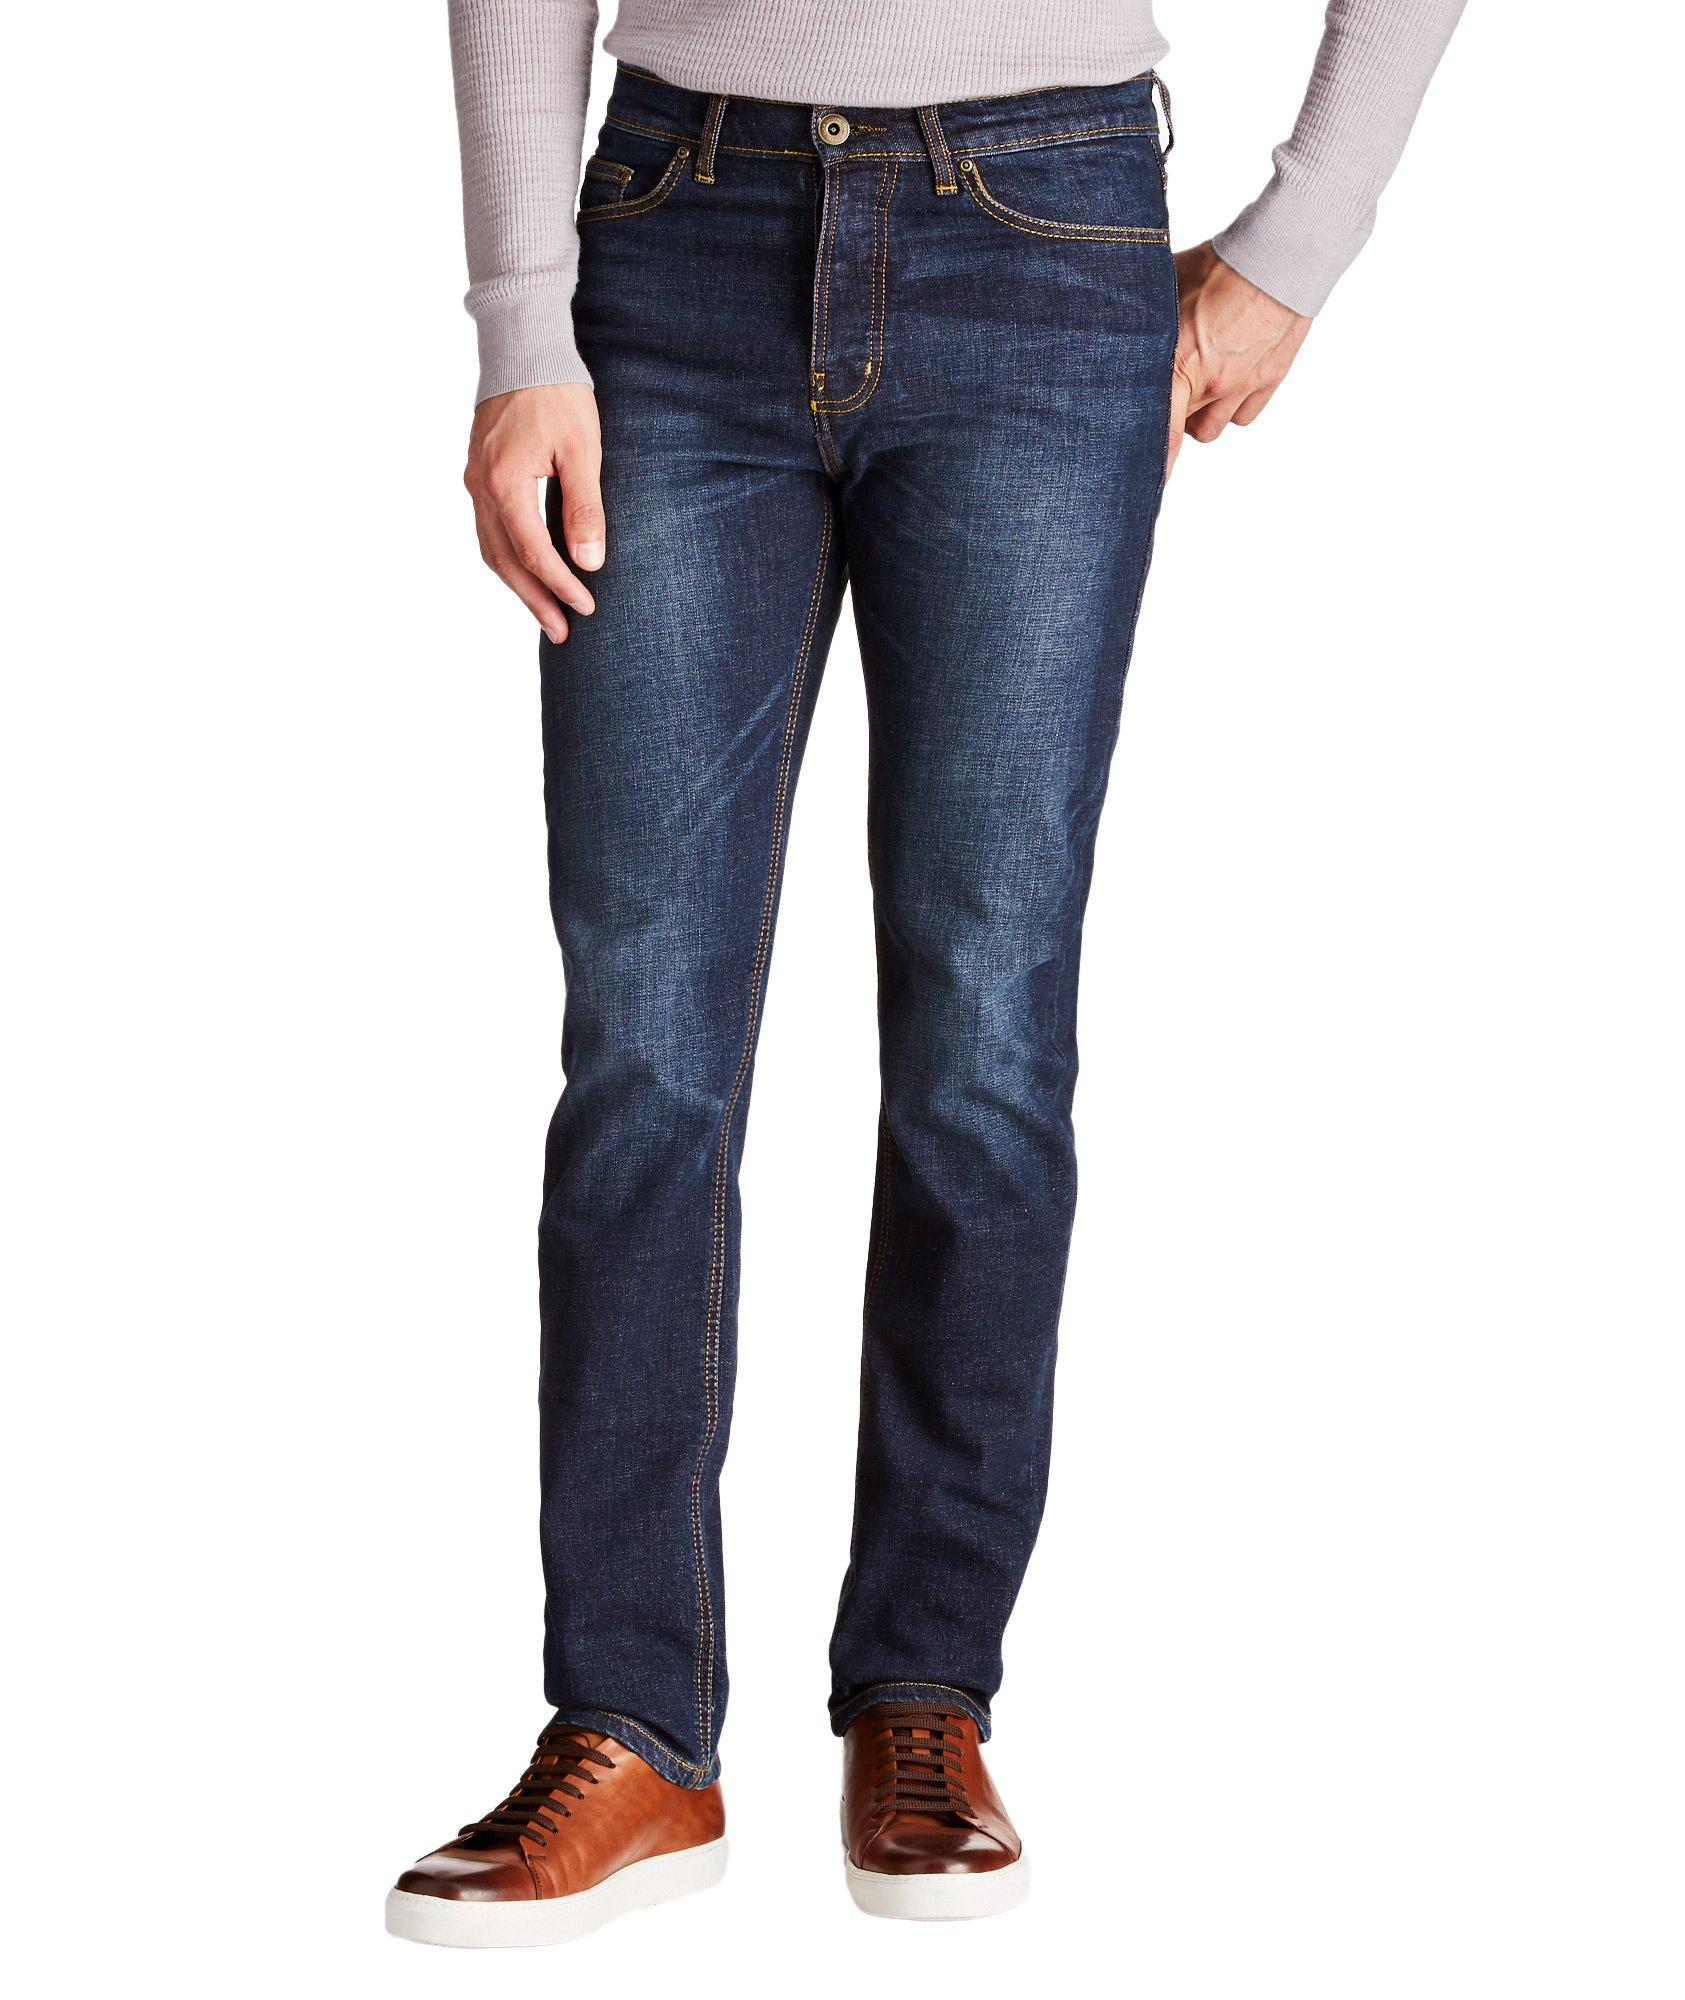 Ranger Straight Fit Jeans image 0